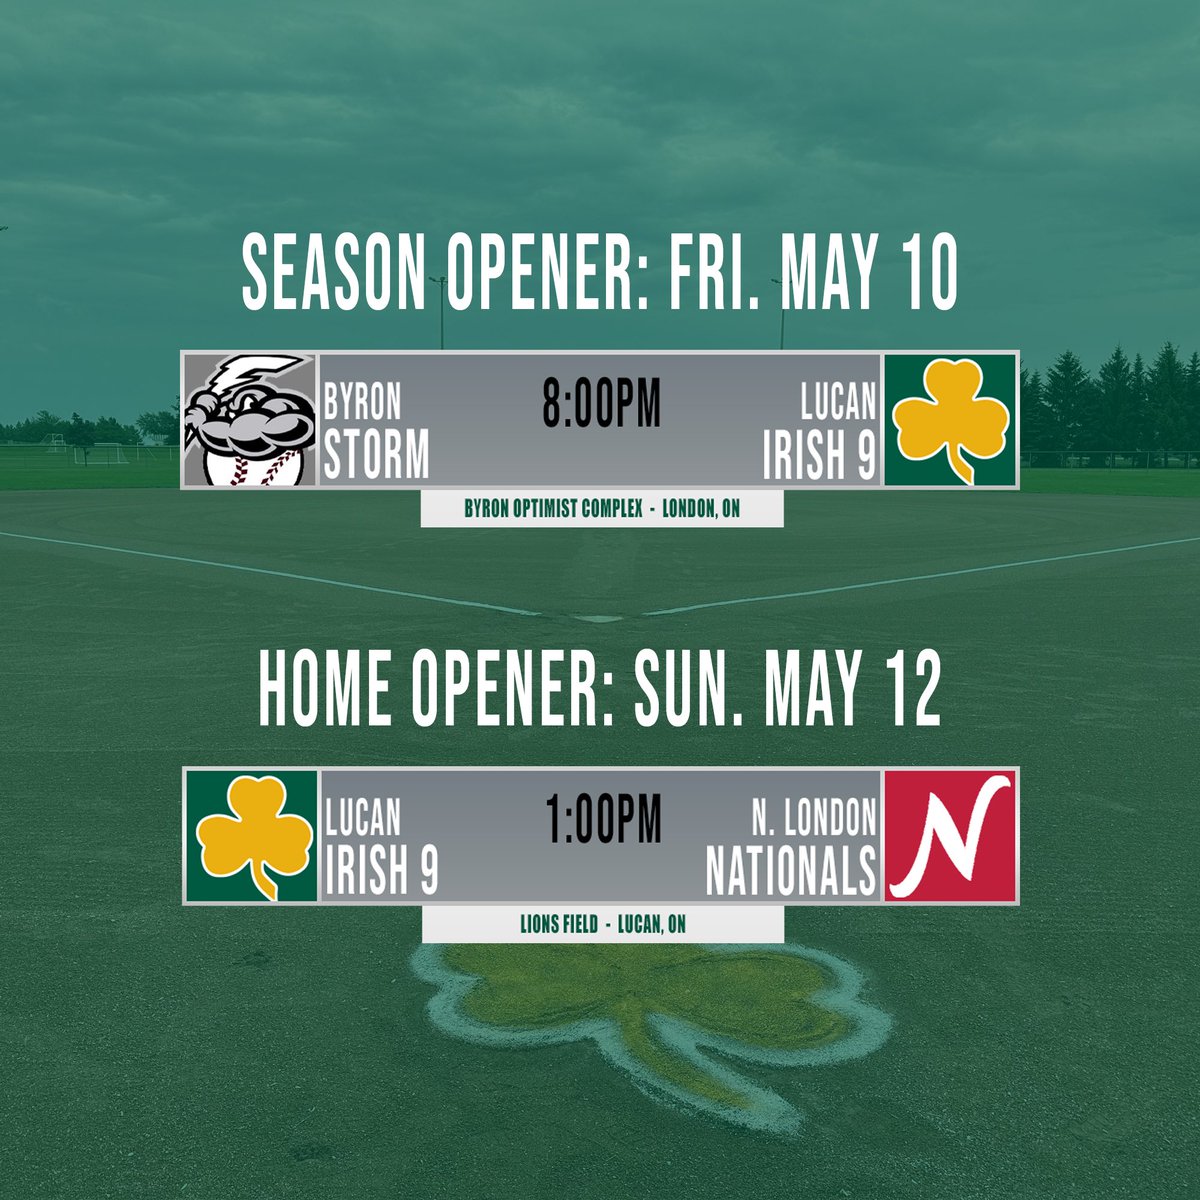 Let the countdown begin! We are 1 month away from baseball! ☘️⚾️ Irish kick off the season May 10 in Byron, before our Home Opener on May 12! Full schedule to come shortly!